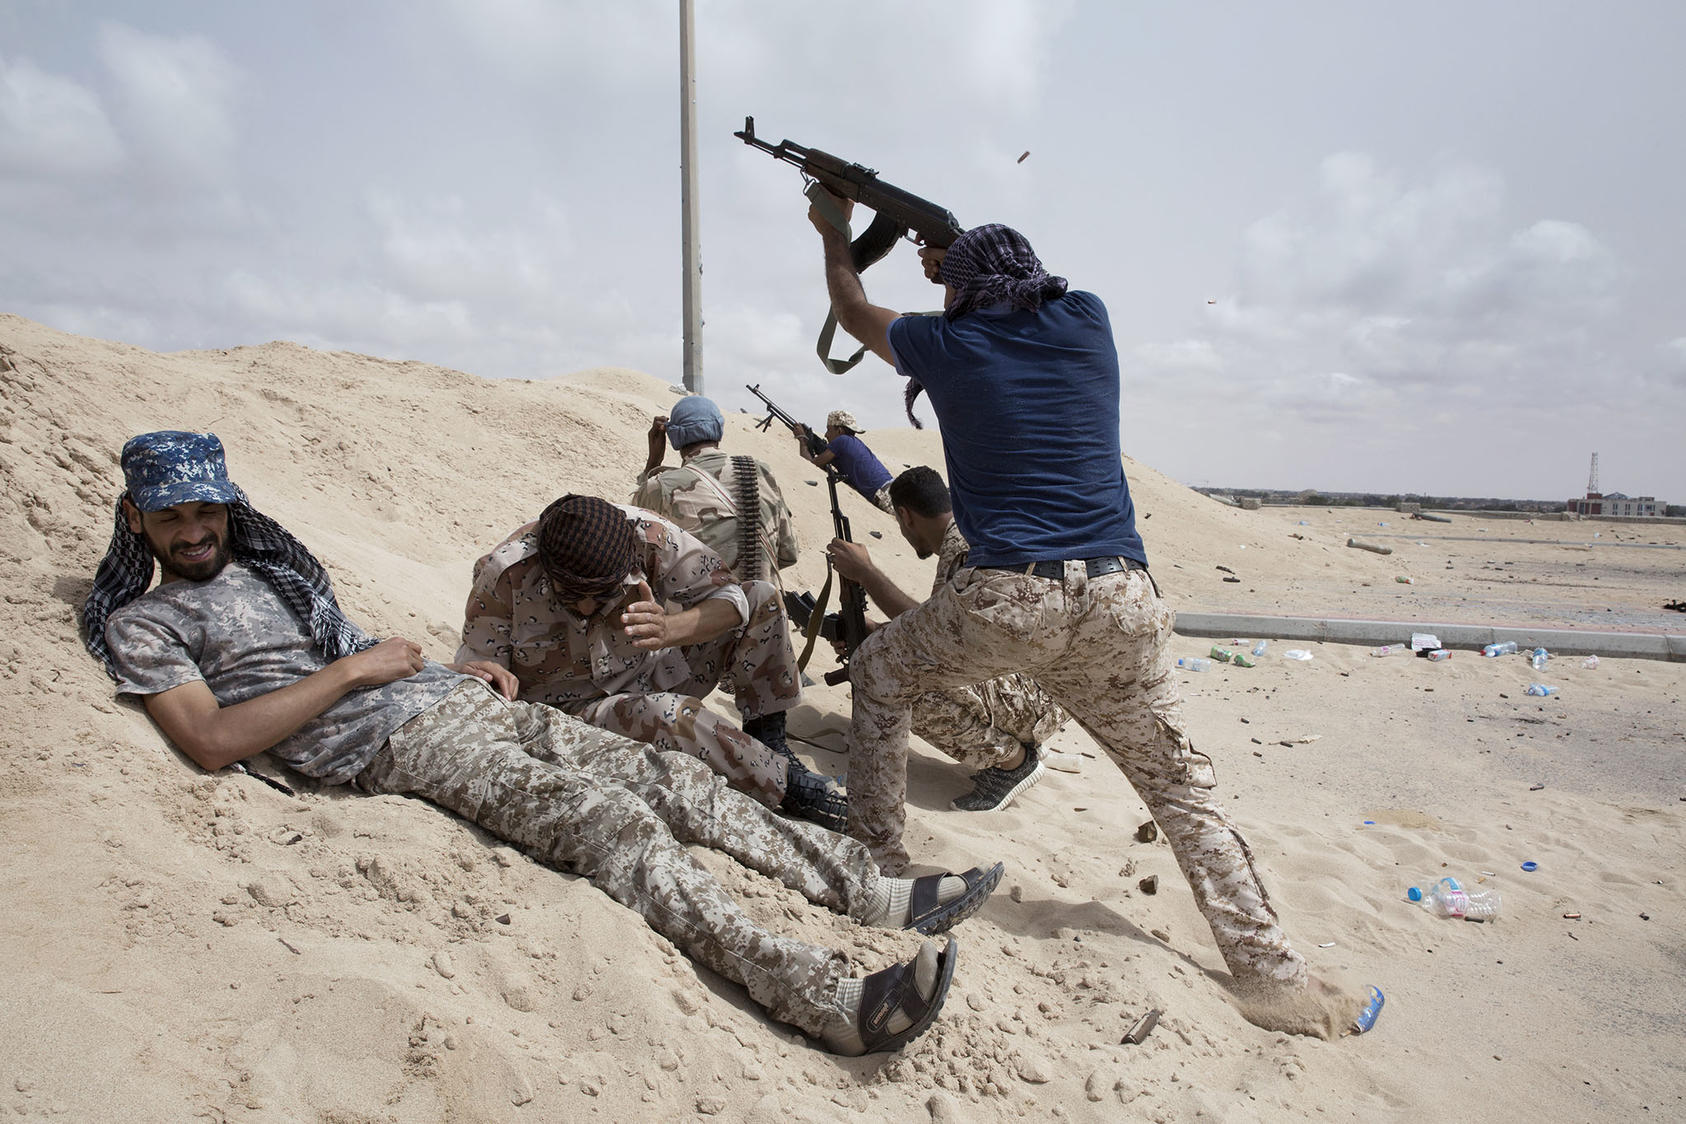 Fighters loyal to the U.N.-backed government battle ISIS in Sirte, Libya, June 23, 2016. Although ousted from Sirte, a security vacuum in the south could lead to the reemergence of ISIS. (Tyler Hicks/The New York Times)